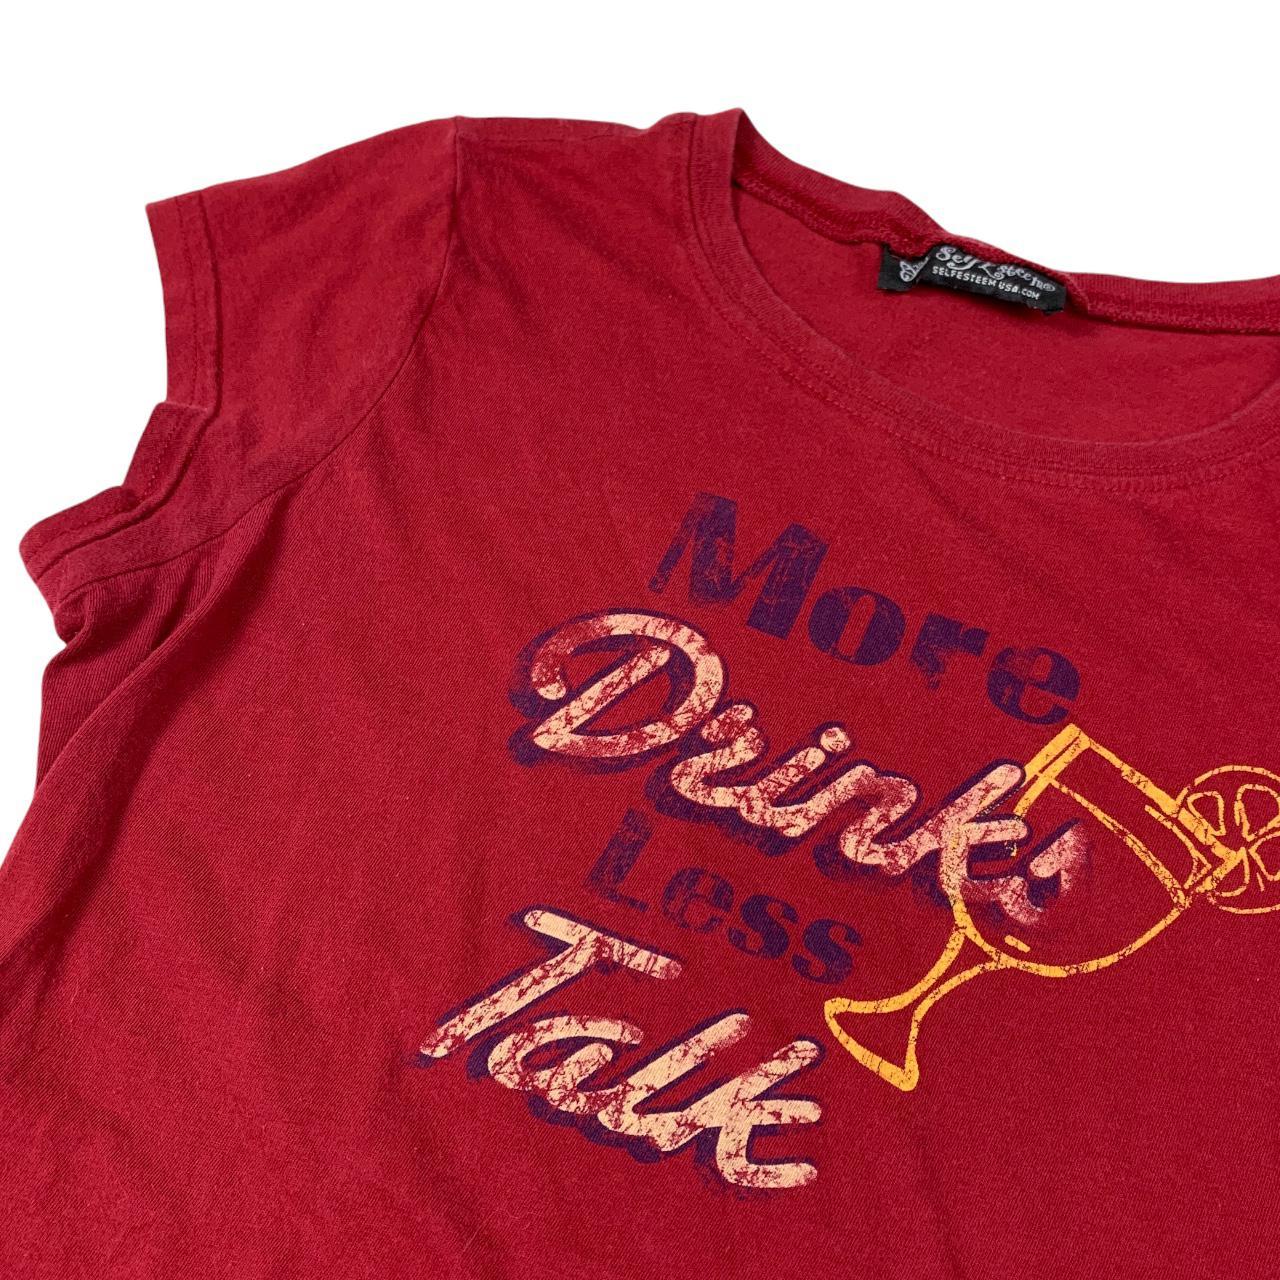 Product Image 2 - MORE DRINK LESS TALK TEE

This